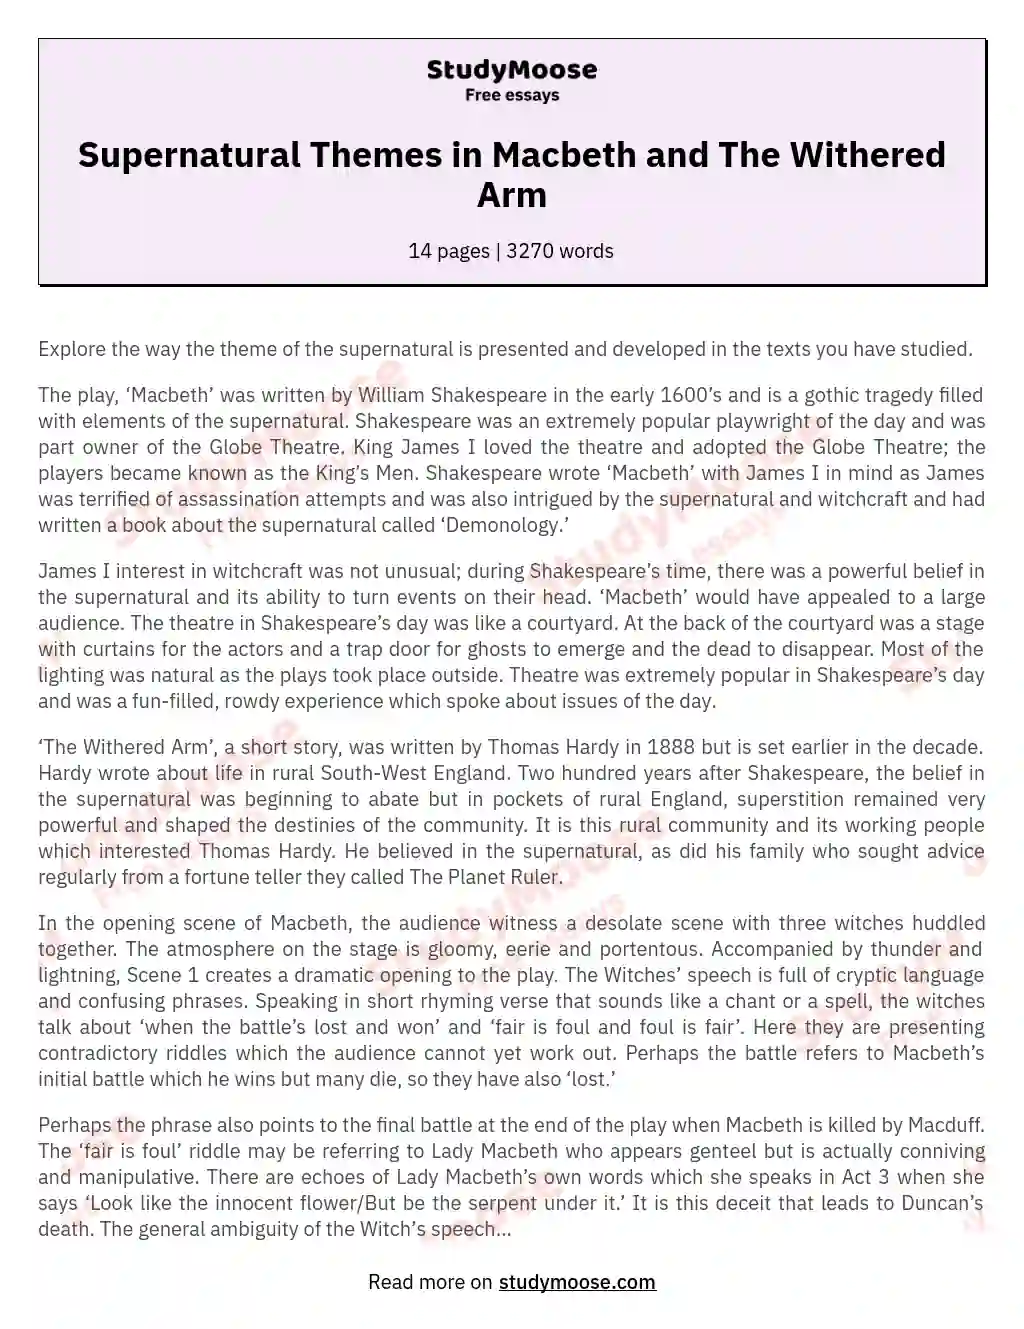 Supernatural Themes in Macbeth and The Withered Arm essay